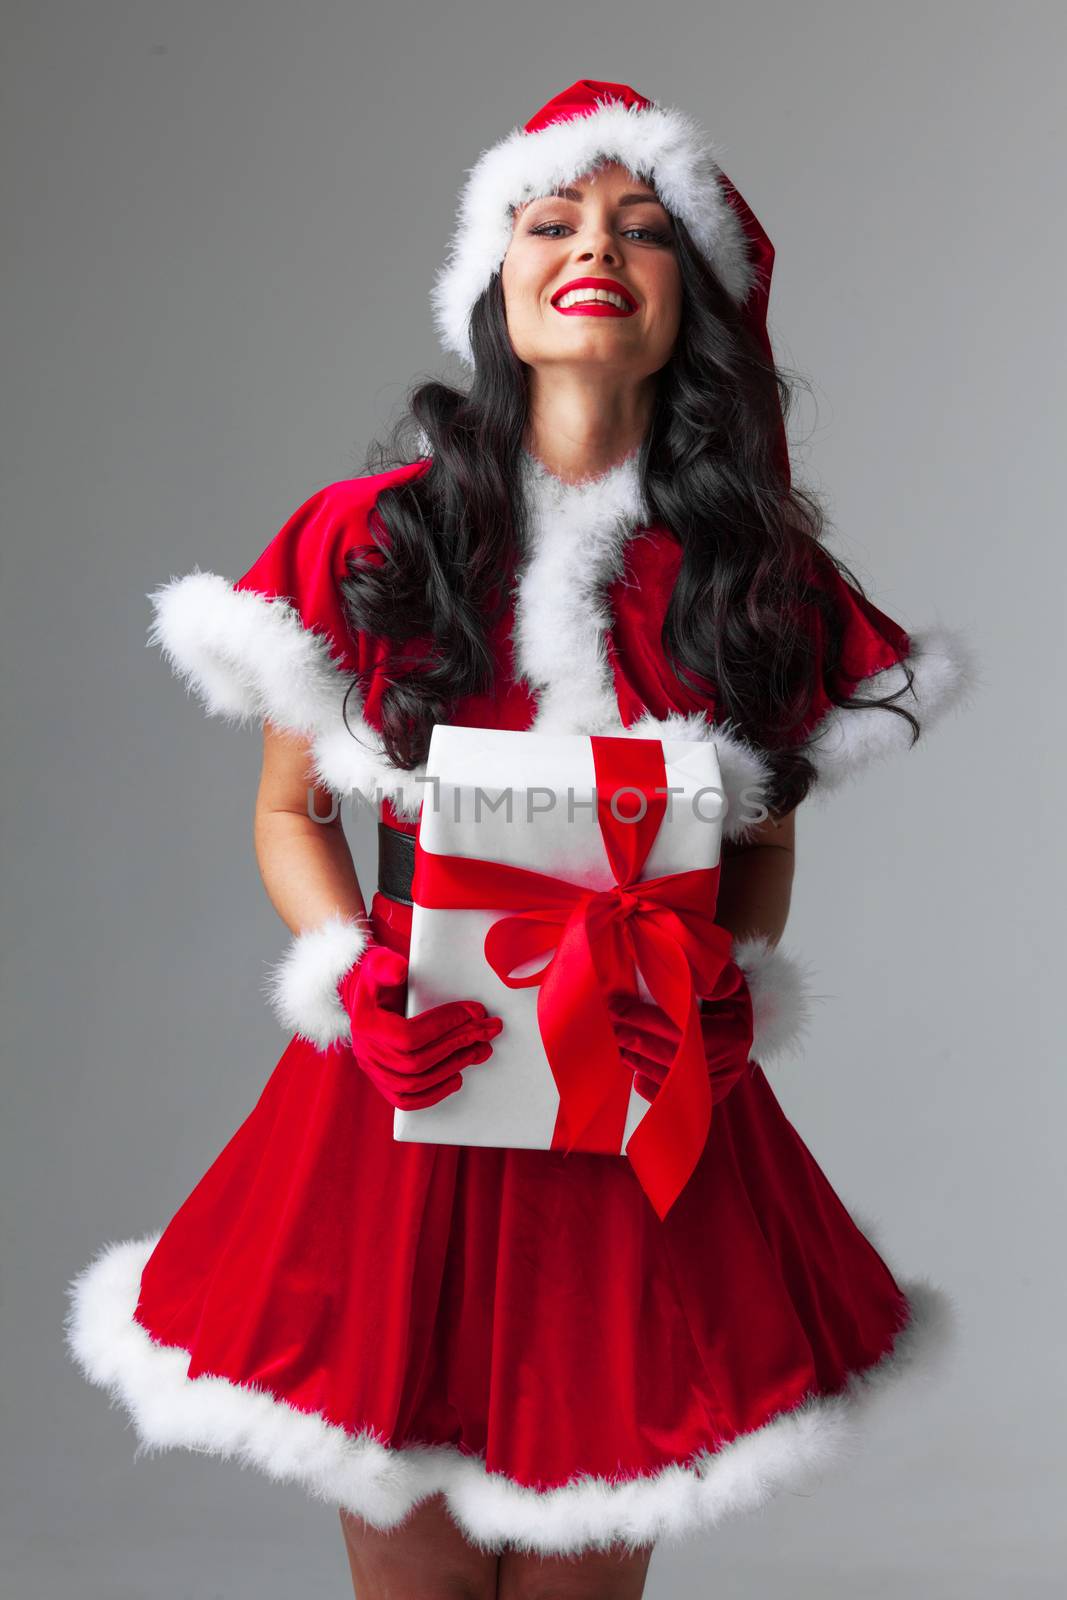 Woman in red Santa Claus outfit by Yellowj